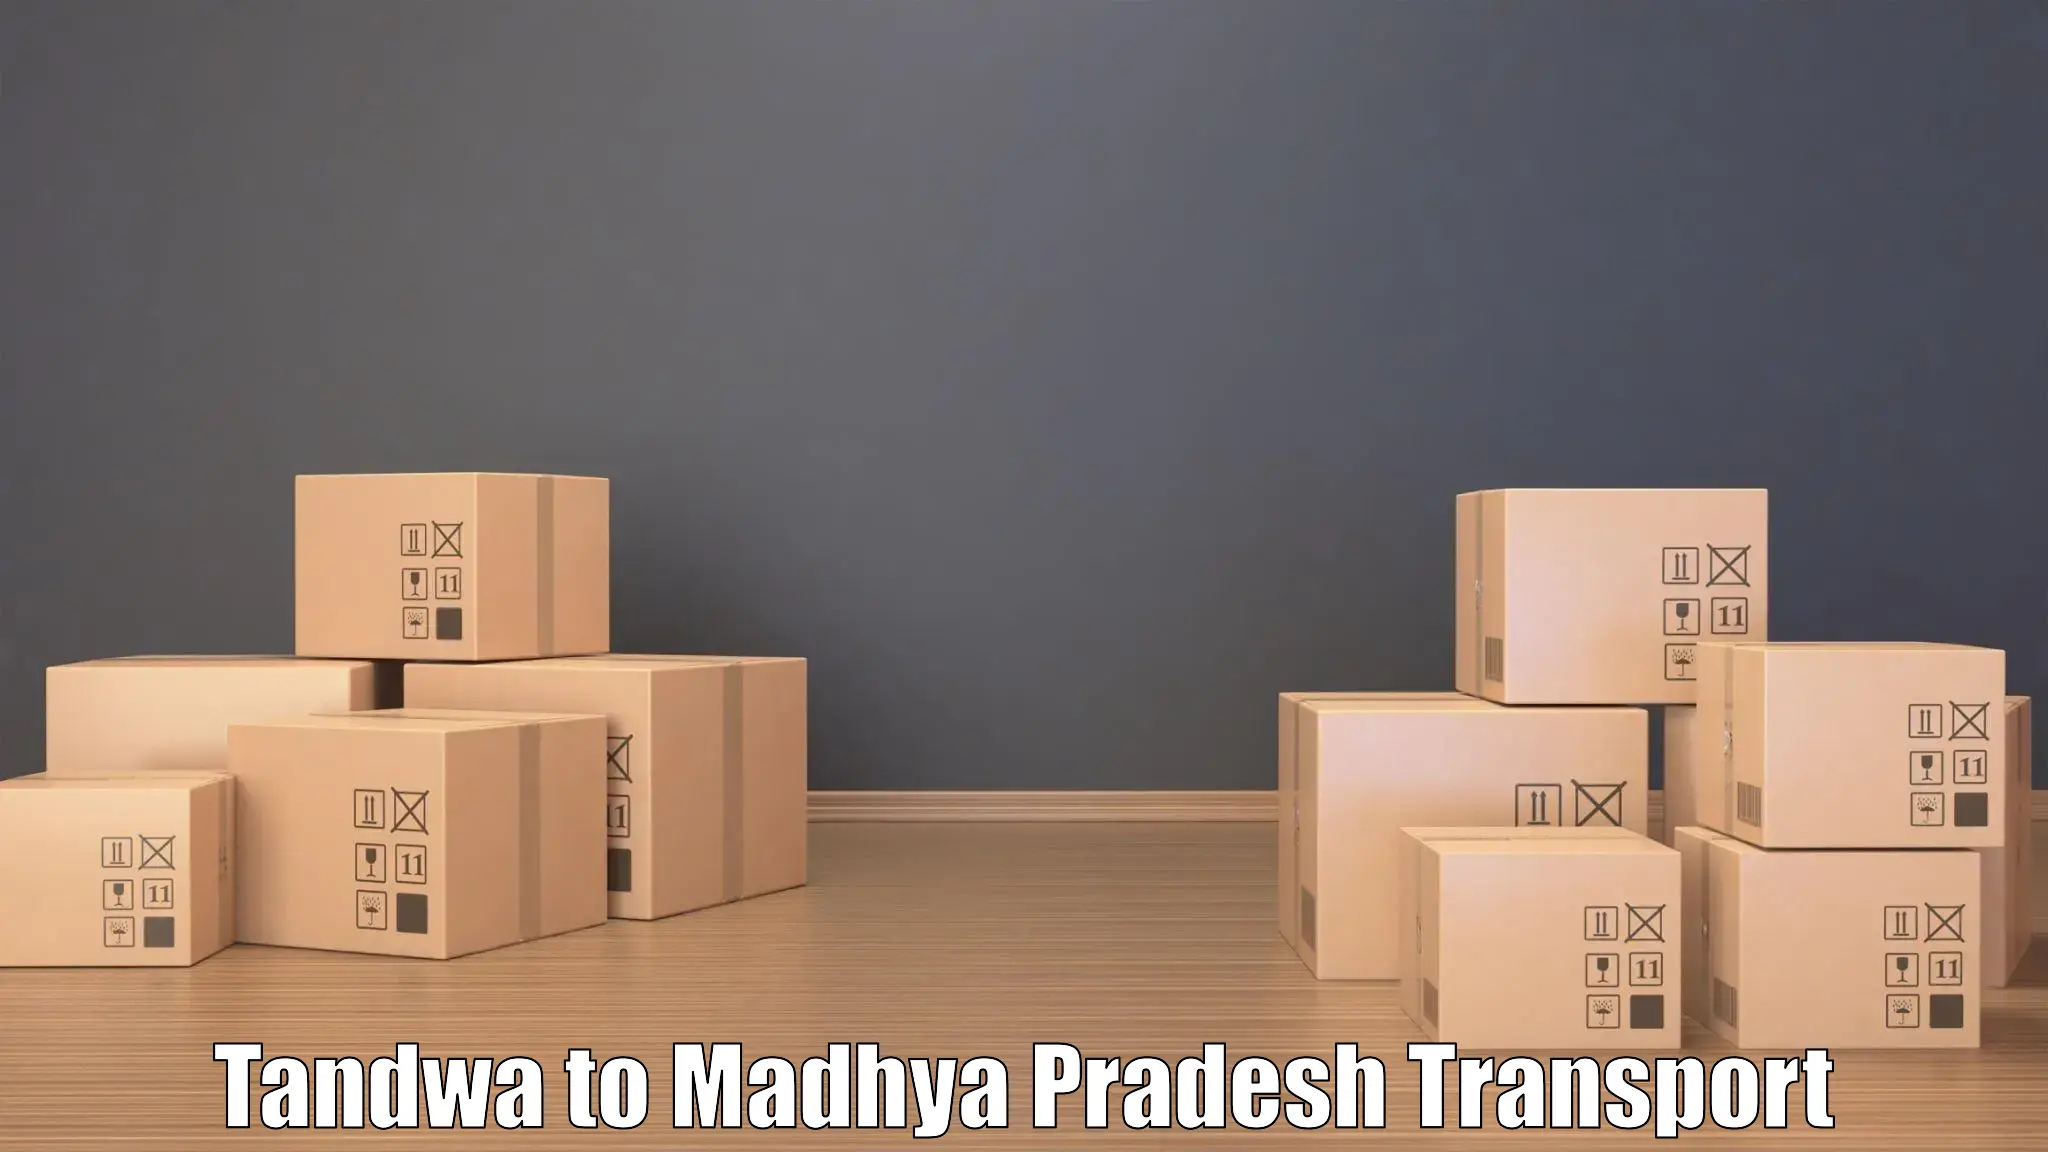 Truck transport companies in India Tandwa to Athner